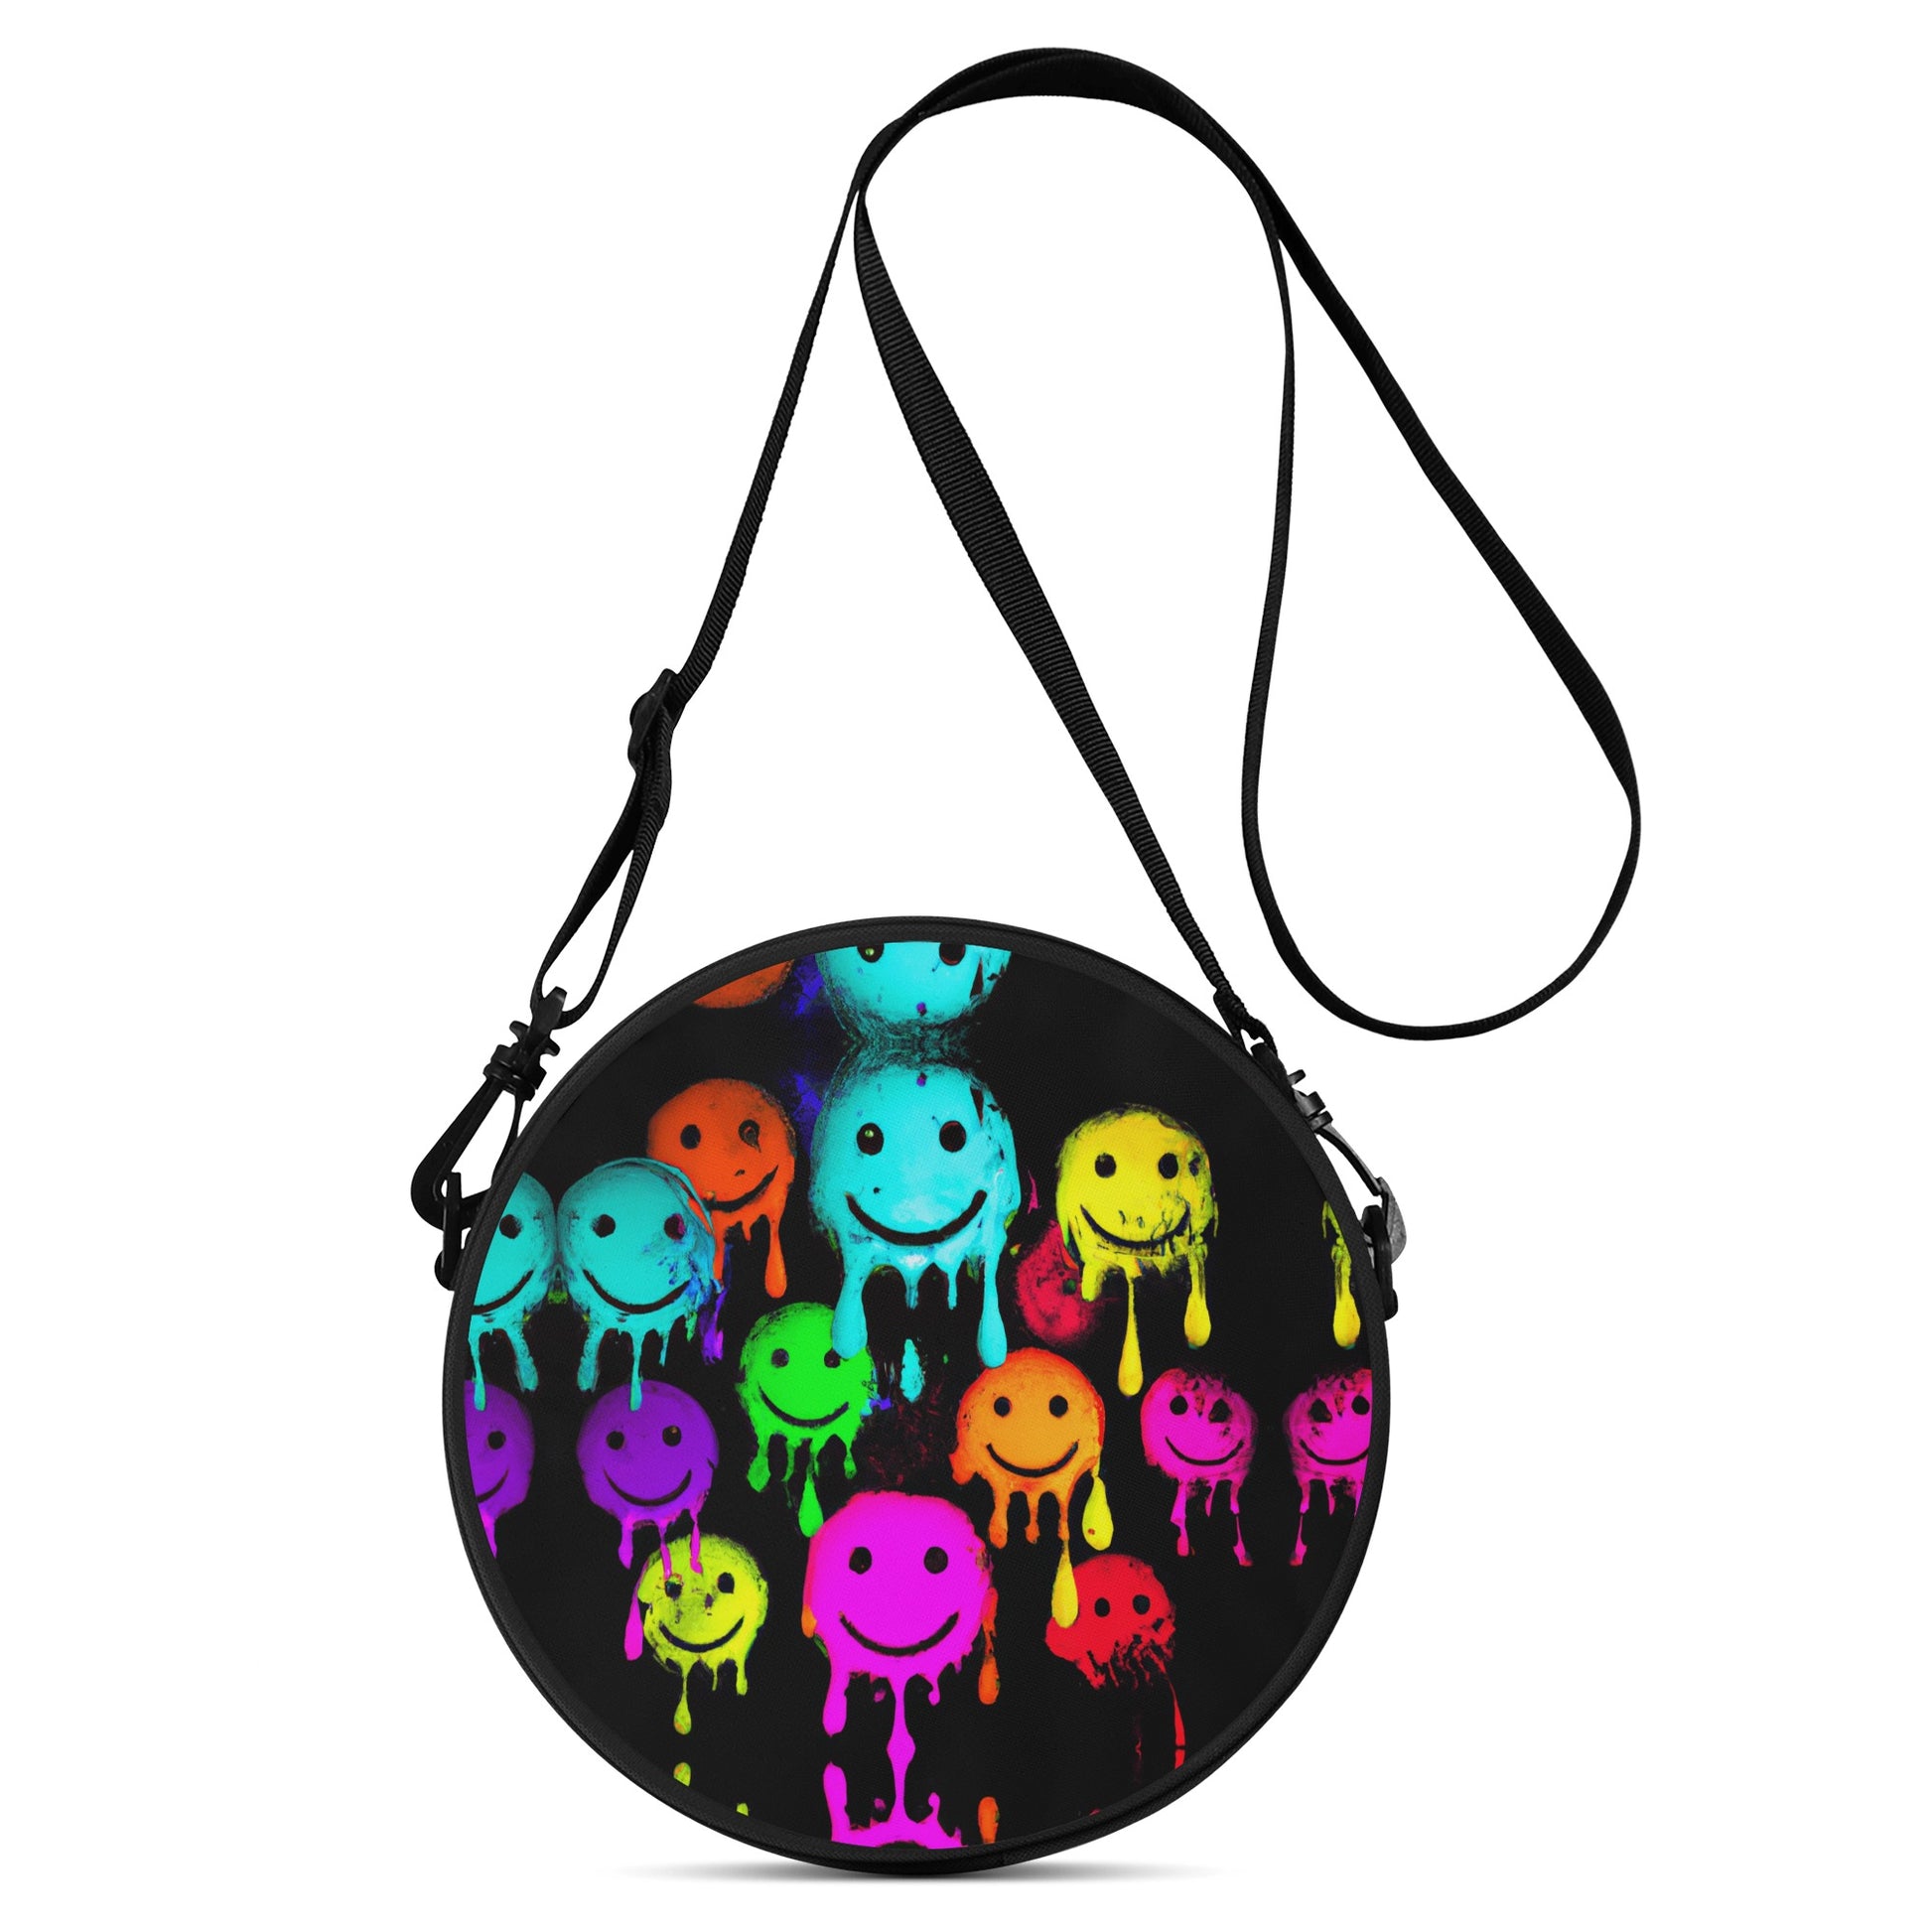 Spray Paint Smile Roud Satchel Bag is unisex. This beautiful round satchel bag is fashion forward and features a wild digitally printed design.  Stencil painted faces look super chic, bright and playful.